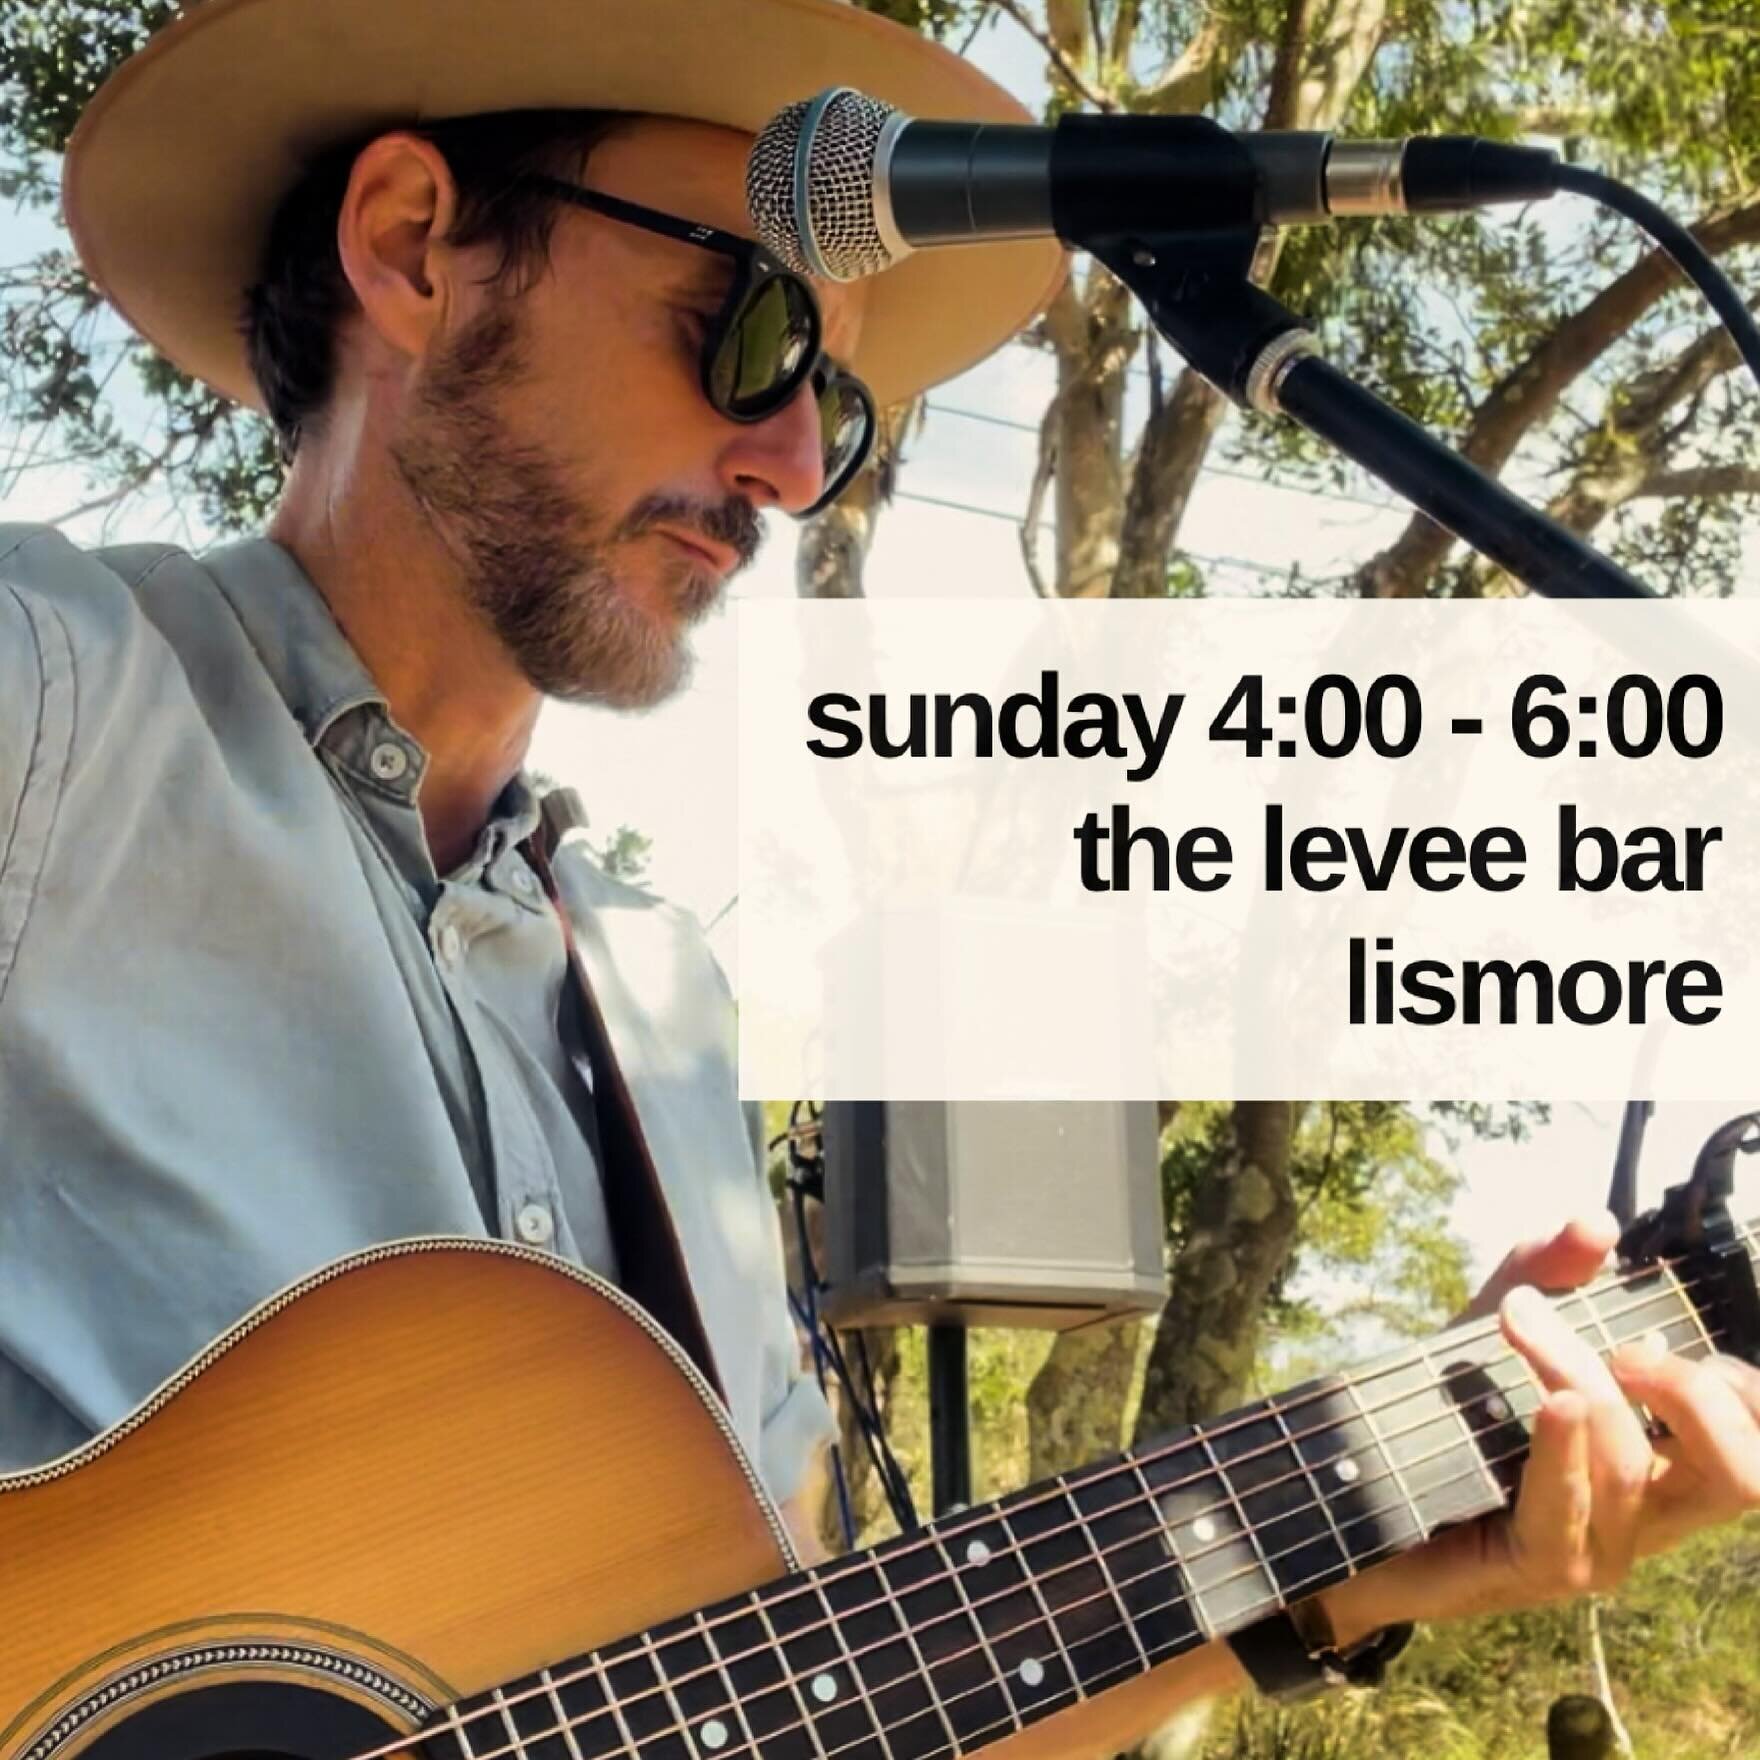 Come and join me at one of Lismores funkiest venues @theleveeloungeandbar this Sunday from 4:00 - 6:00 for live music and the tastiest cocktails around 🎼✨🍸